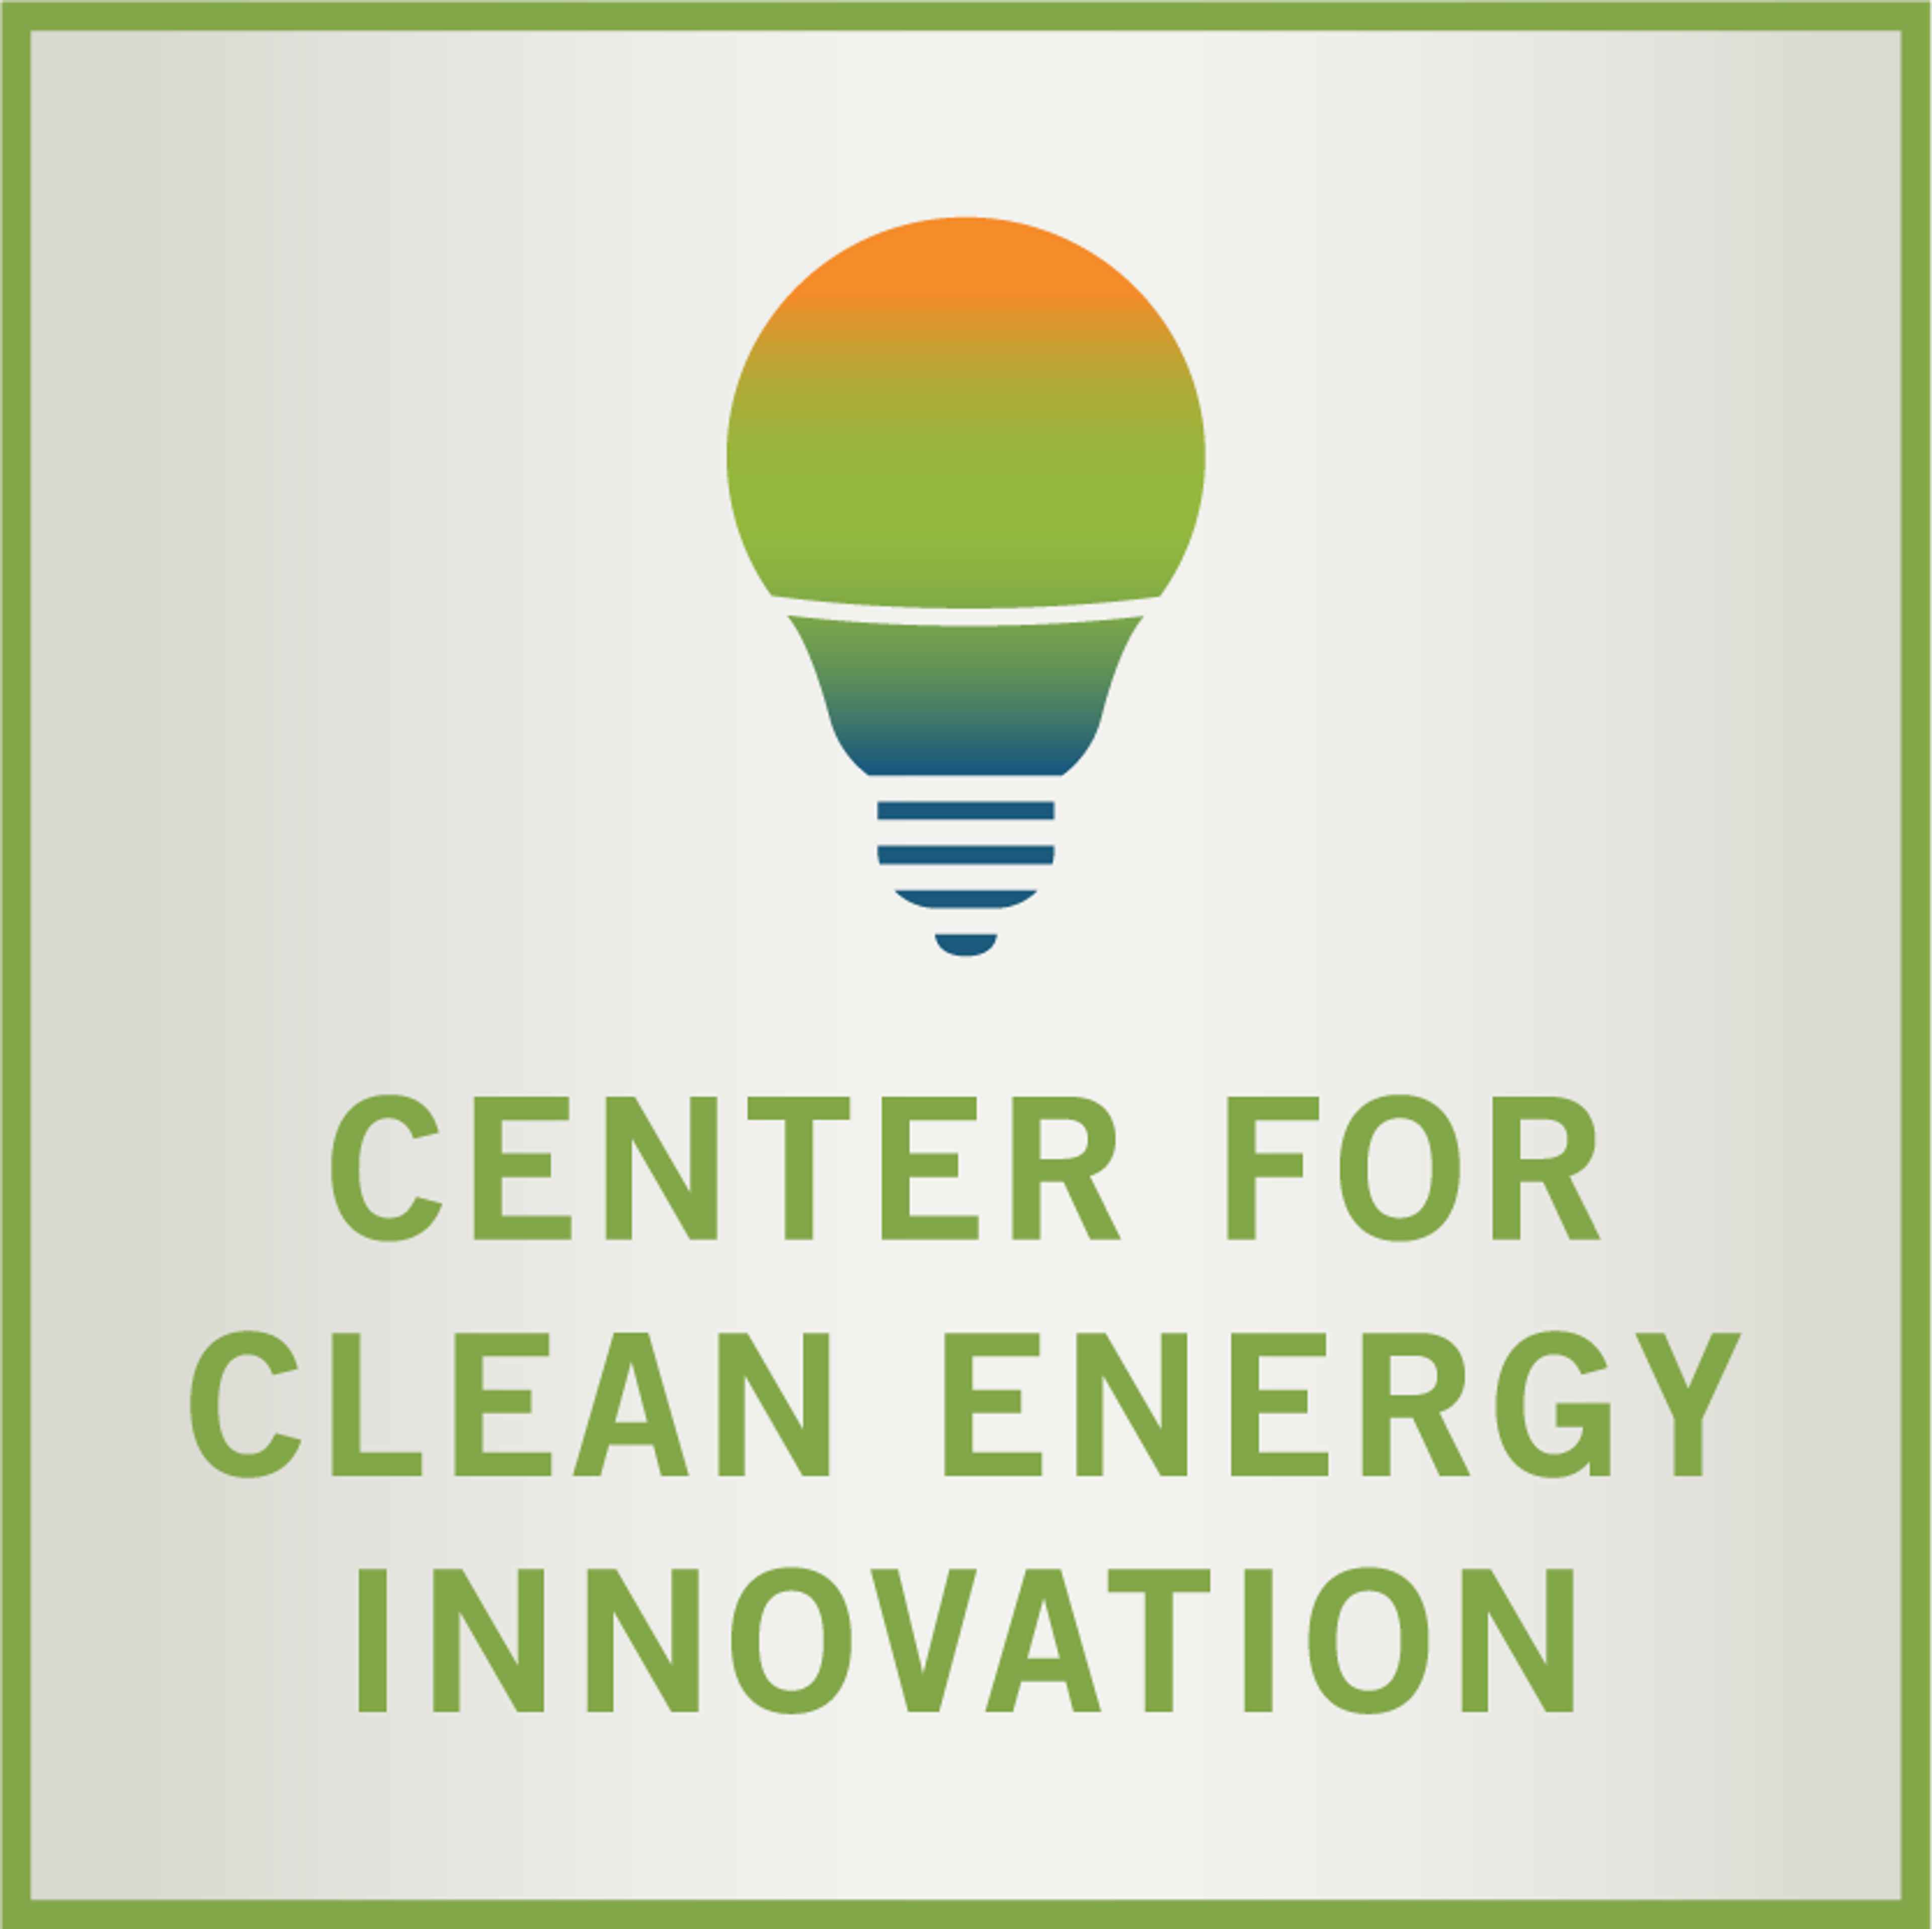 Reimagining Energy Permitting for the 21st Century